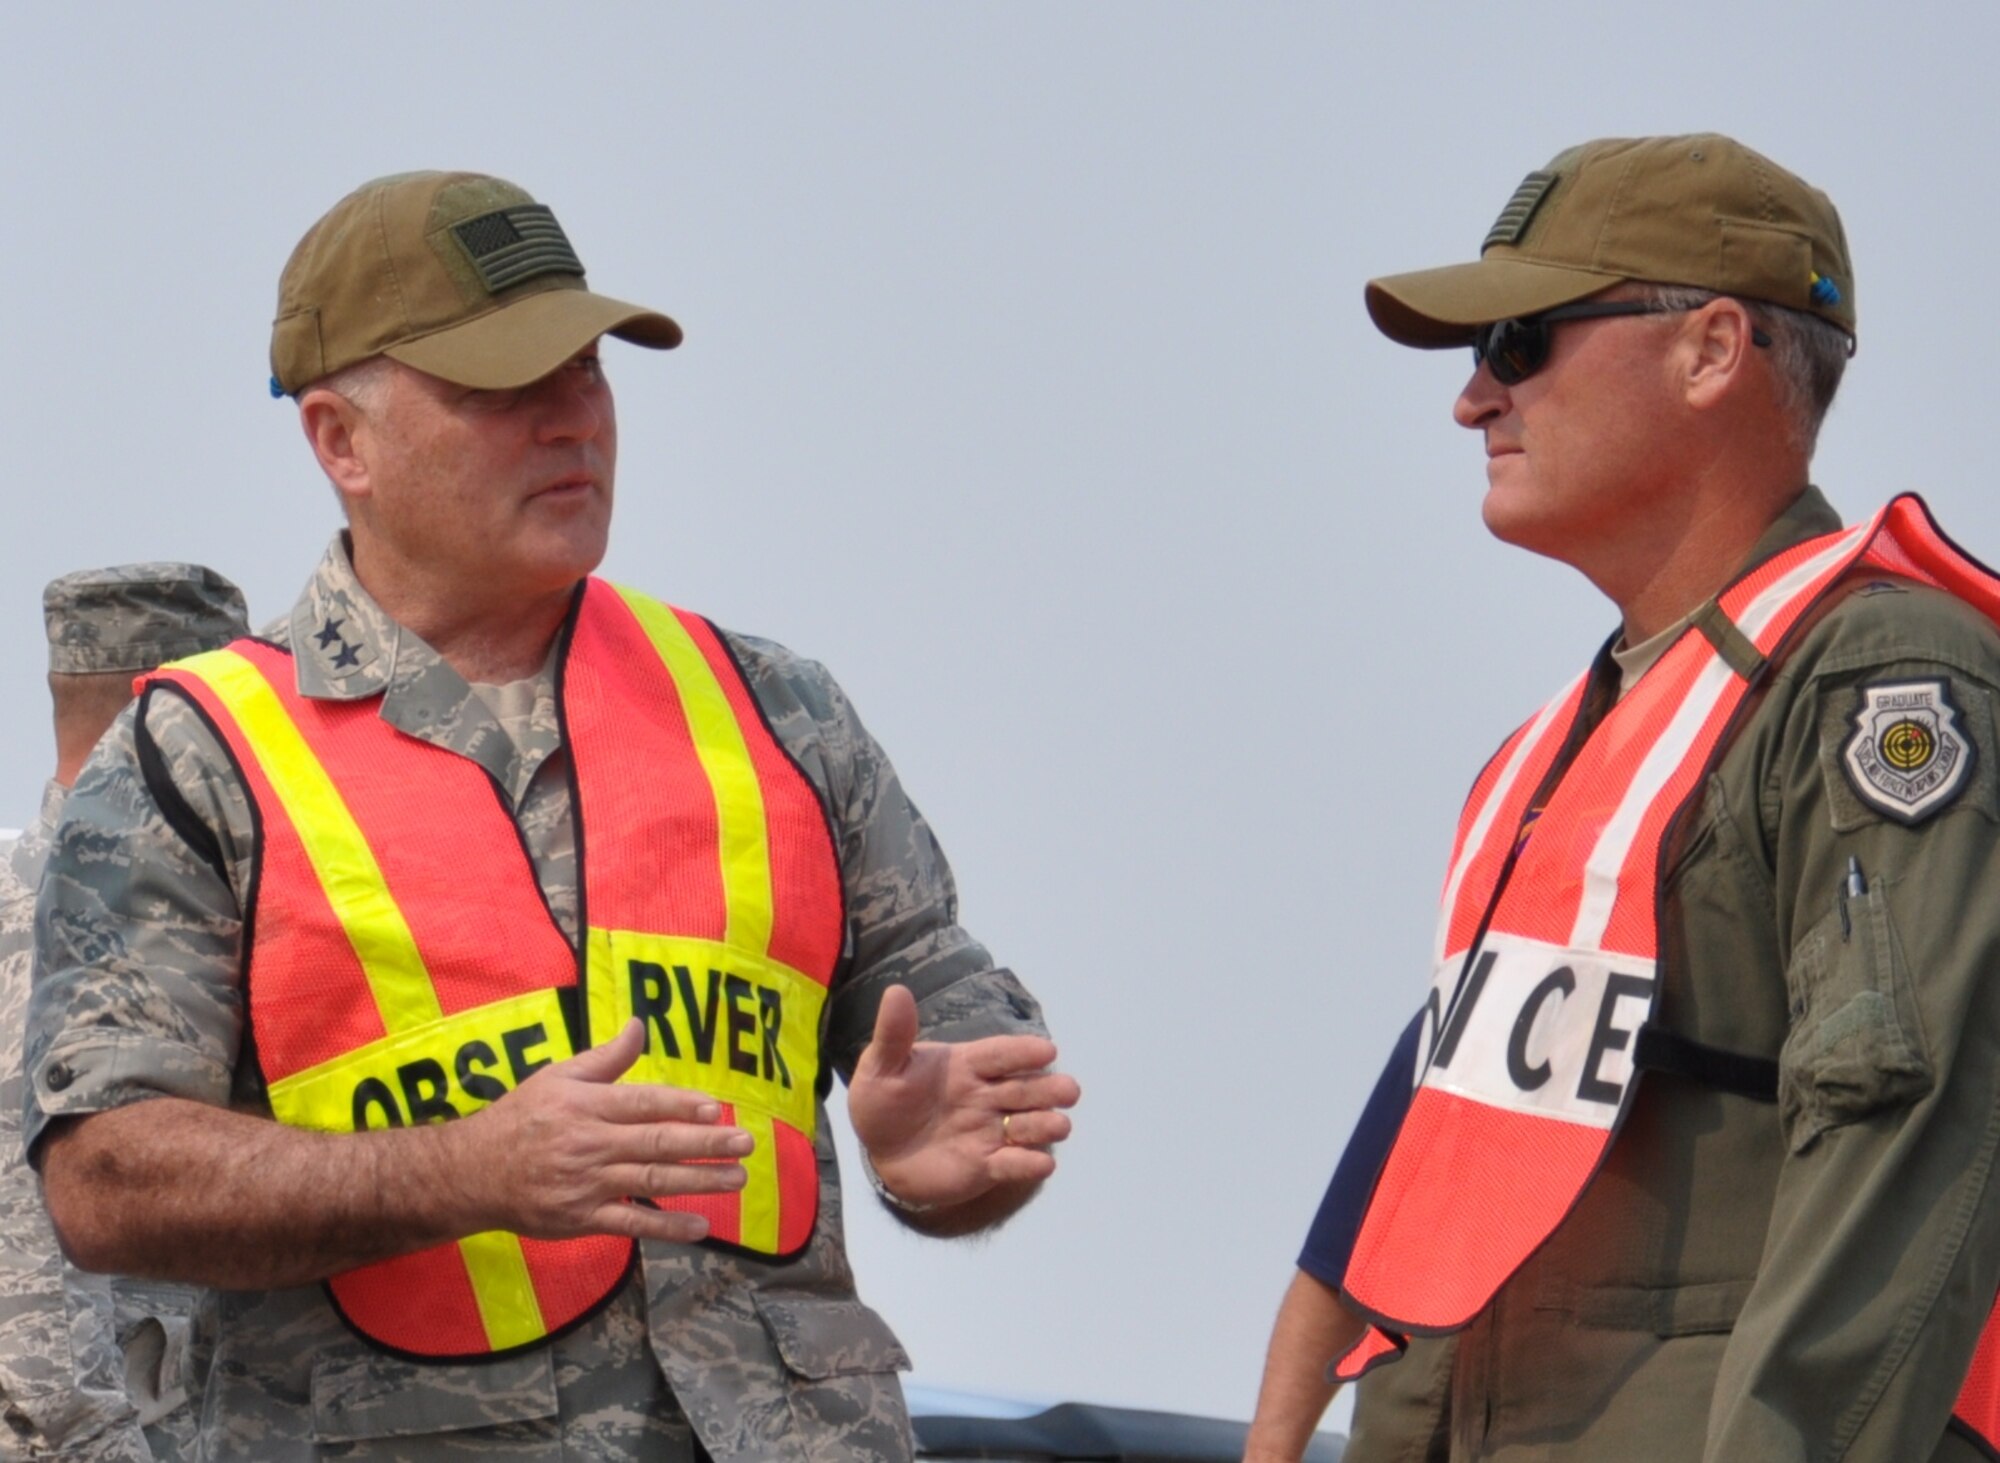 Maj. Gen. Michael J. Carey, 20th Air Force commander, discusses helicopter operations with Brig. Gen. James Browne, Air Force Global Strike Command director of operations, during a visit to the 620th Ground Combat Training Squadron at Camp Guernsey, Wyo., Aug. 15. During his visit, Browne had the
opportunity to view helicopter operations, as they pertain to the sustainment of nuclear security, and the unique strengths they bring to the fight. (U.S. Air Force photo by Staff Sgt. Torri Savarese)
